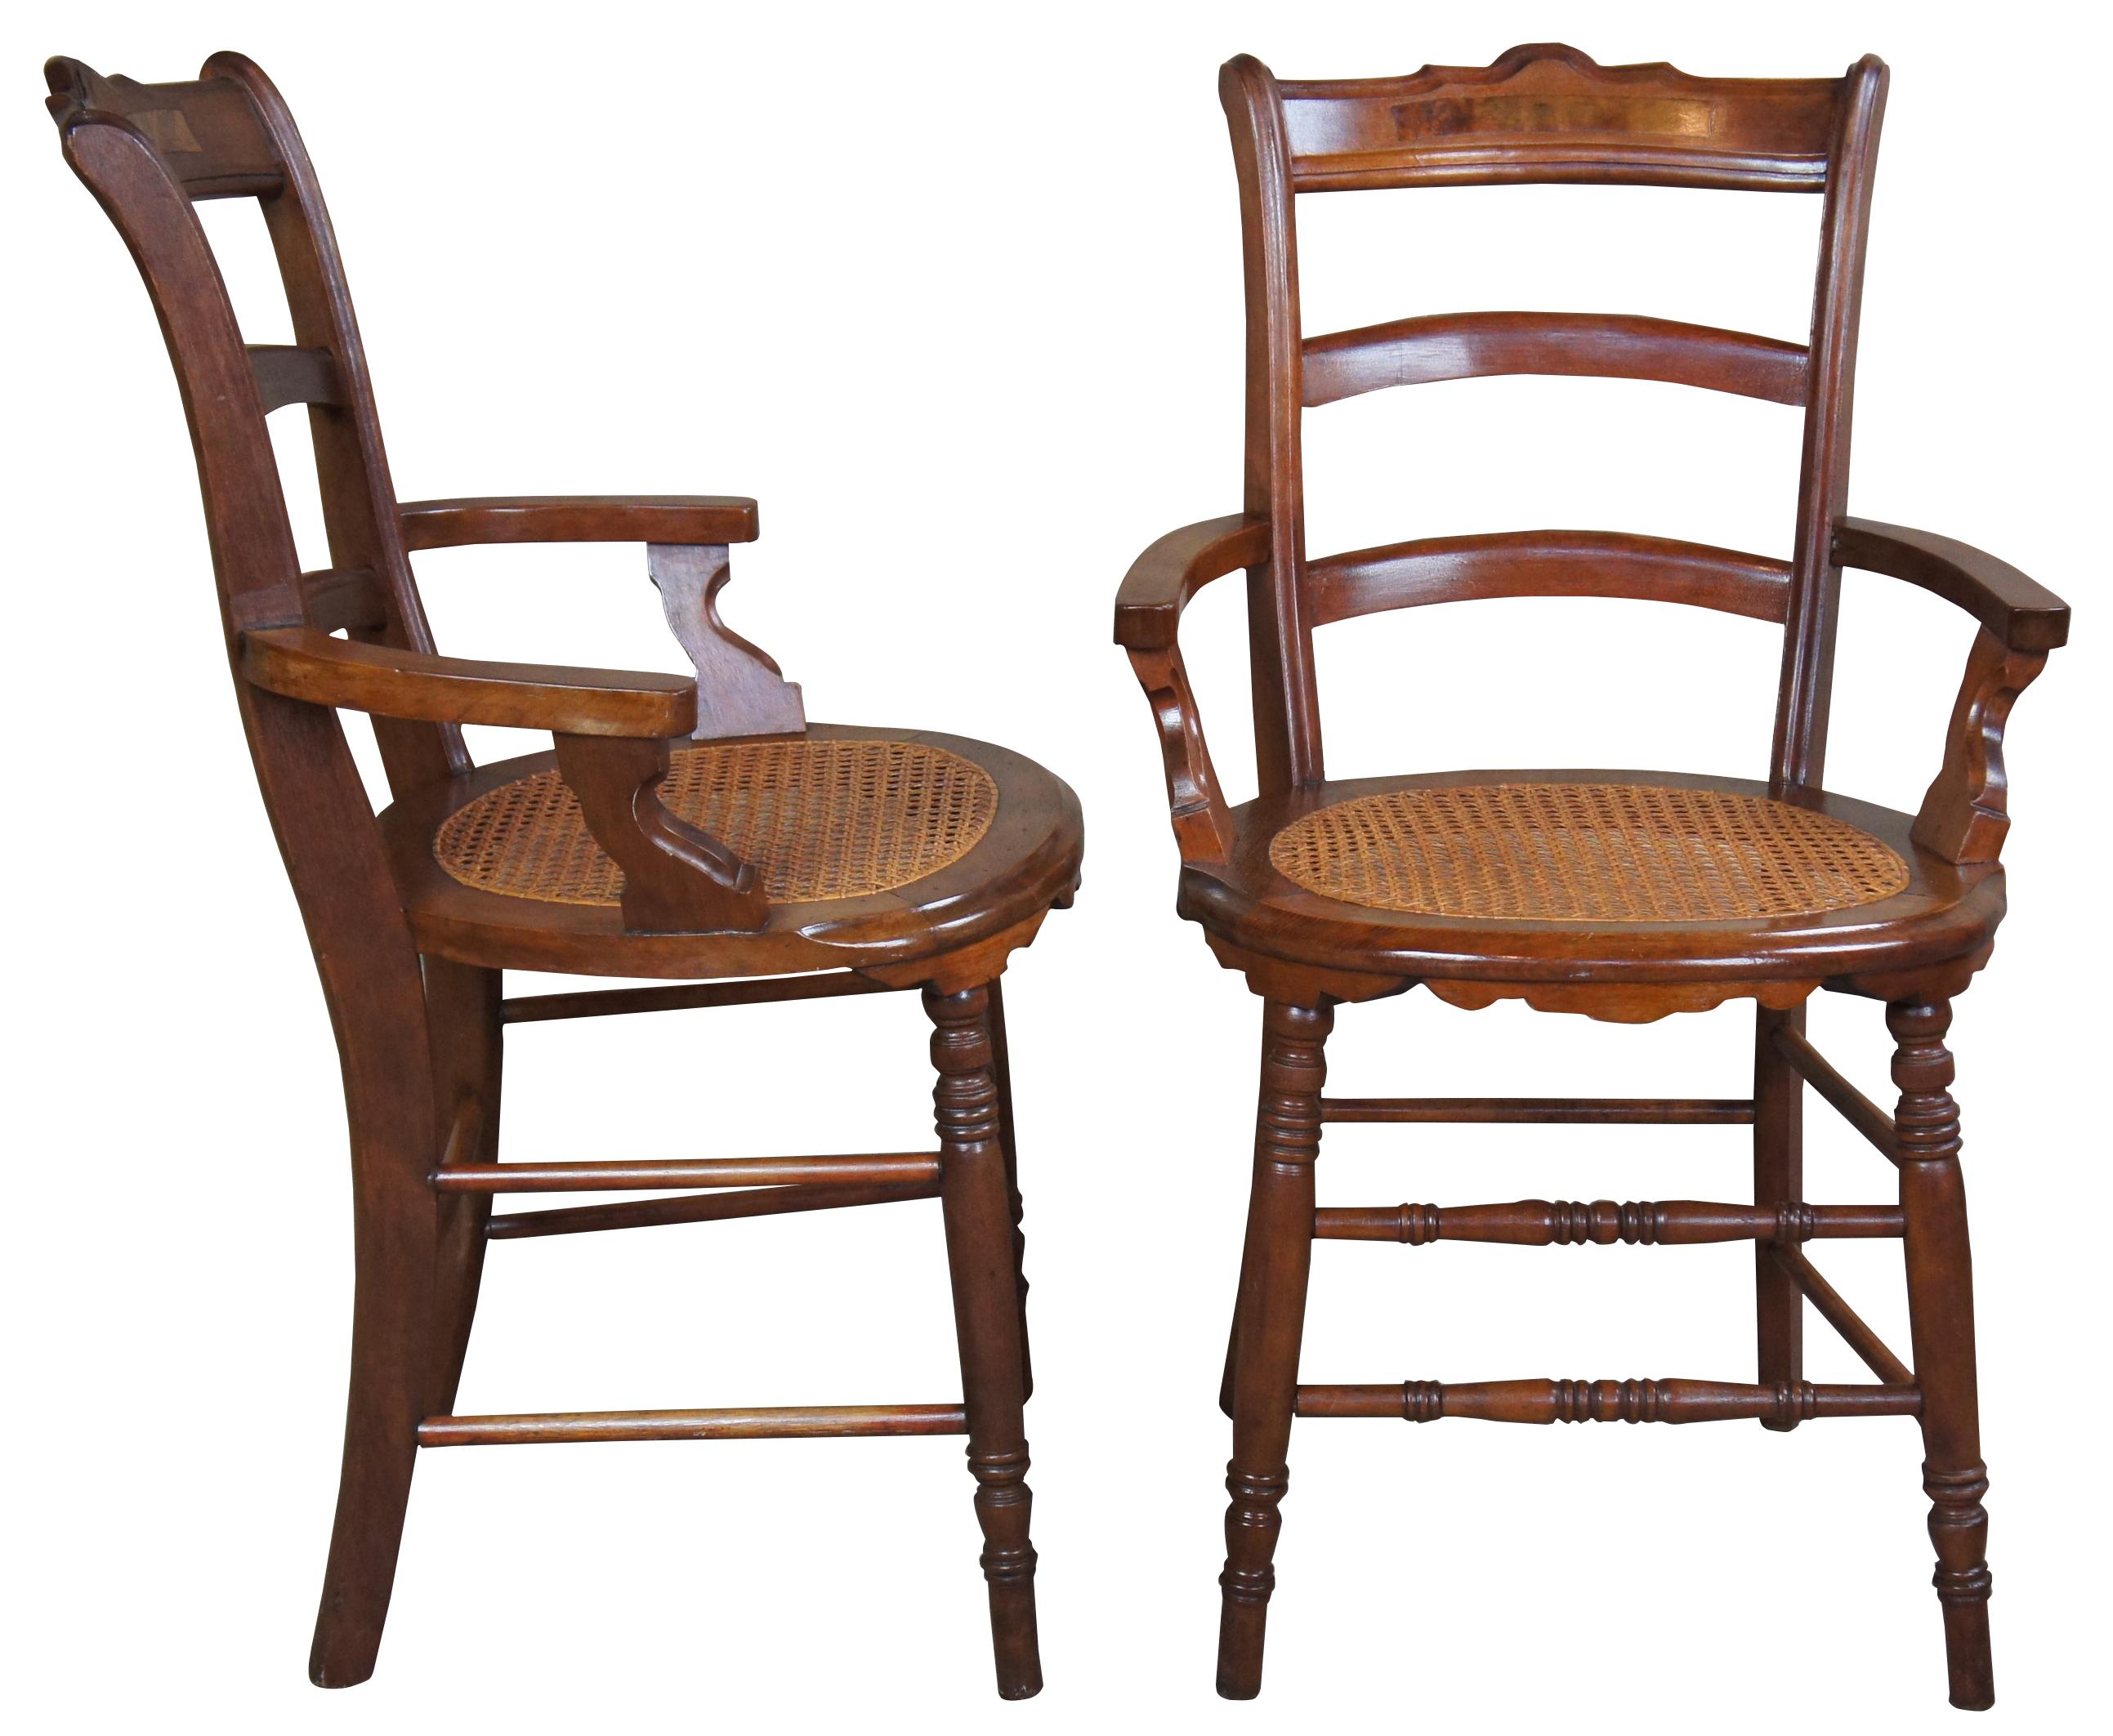 A neat pair of Victorian chairs, circa late 19th century. Made from walnut with burled panels, carved accents and a cane seat.